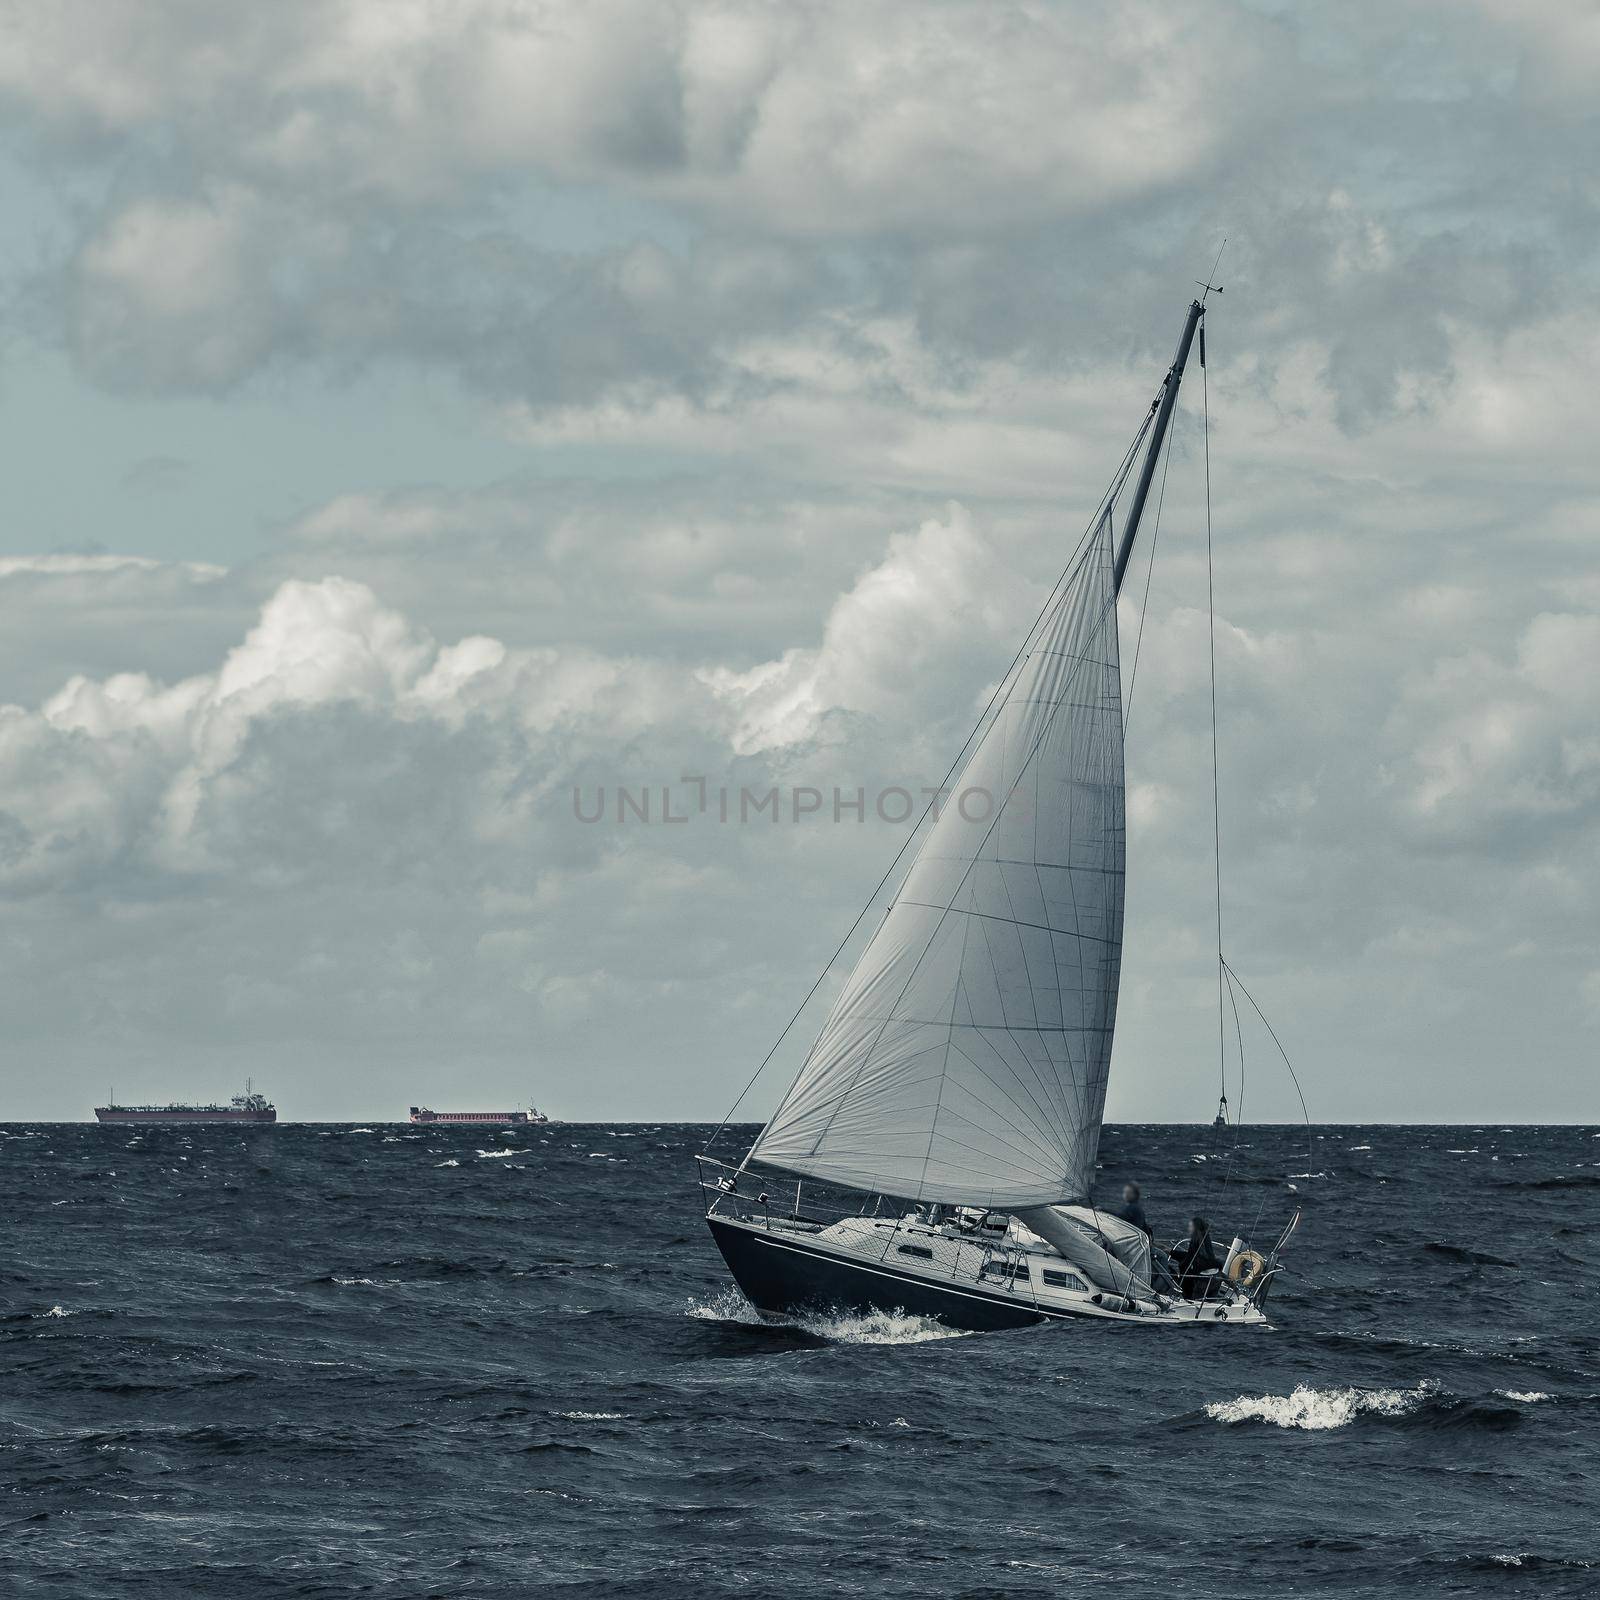 Blue sailboat in a travel at stormy sea. Regata journey. Toned